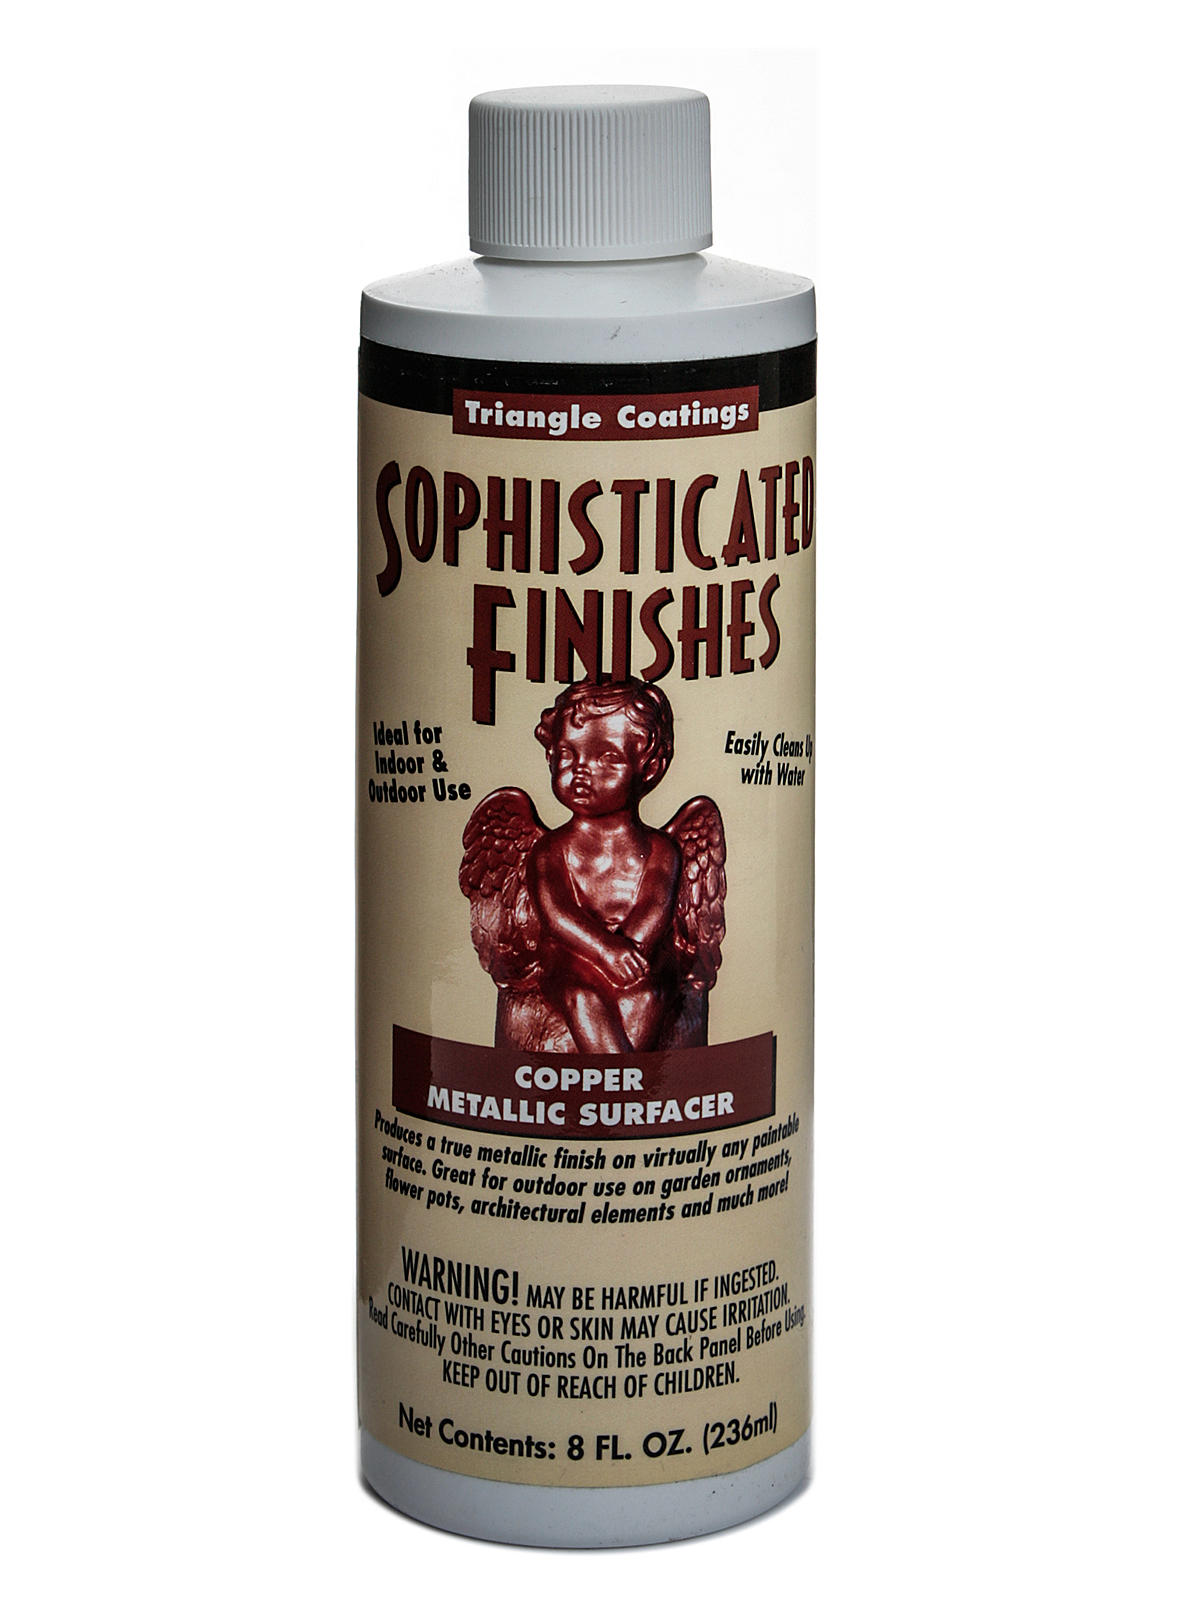 Sophisticated Finishes Metallic Surfacers Copper 8 Oz.